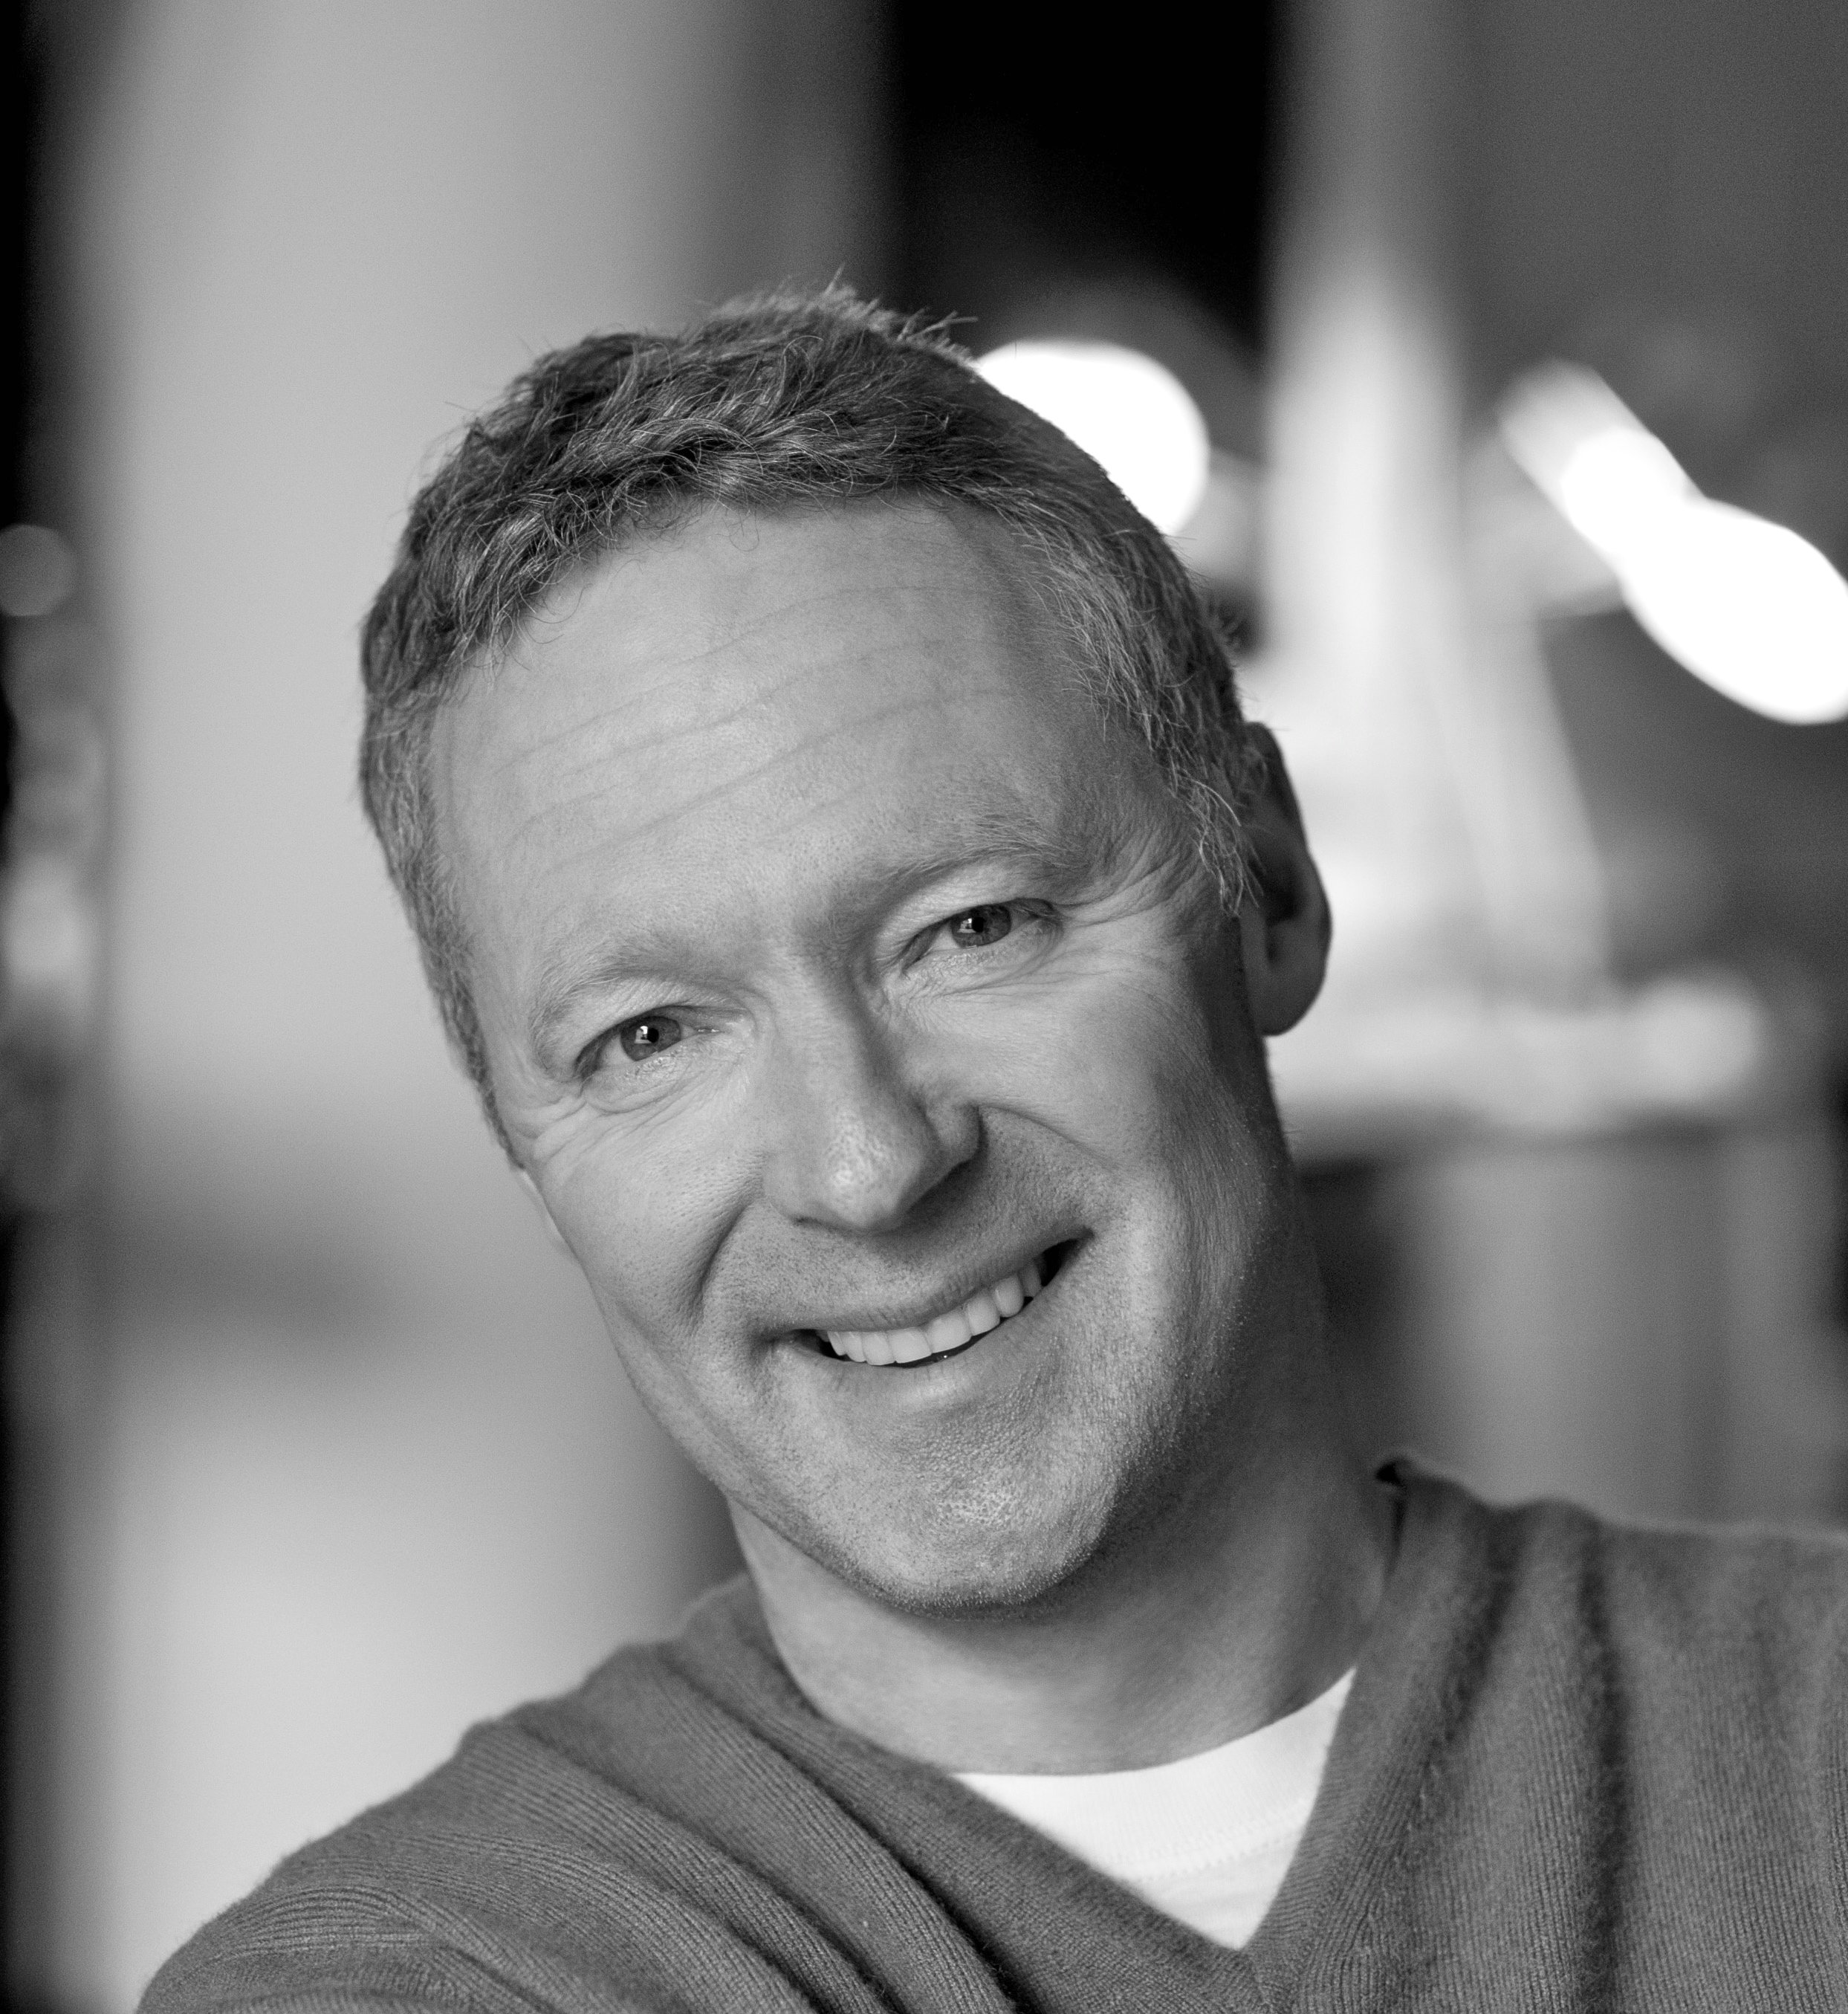 Pay Attention - Rory Bremner talked to Mersey Care about living with ADHD featured image